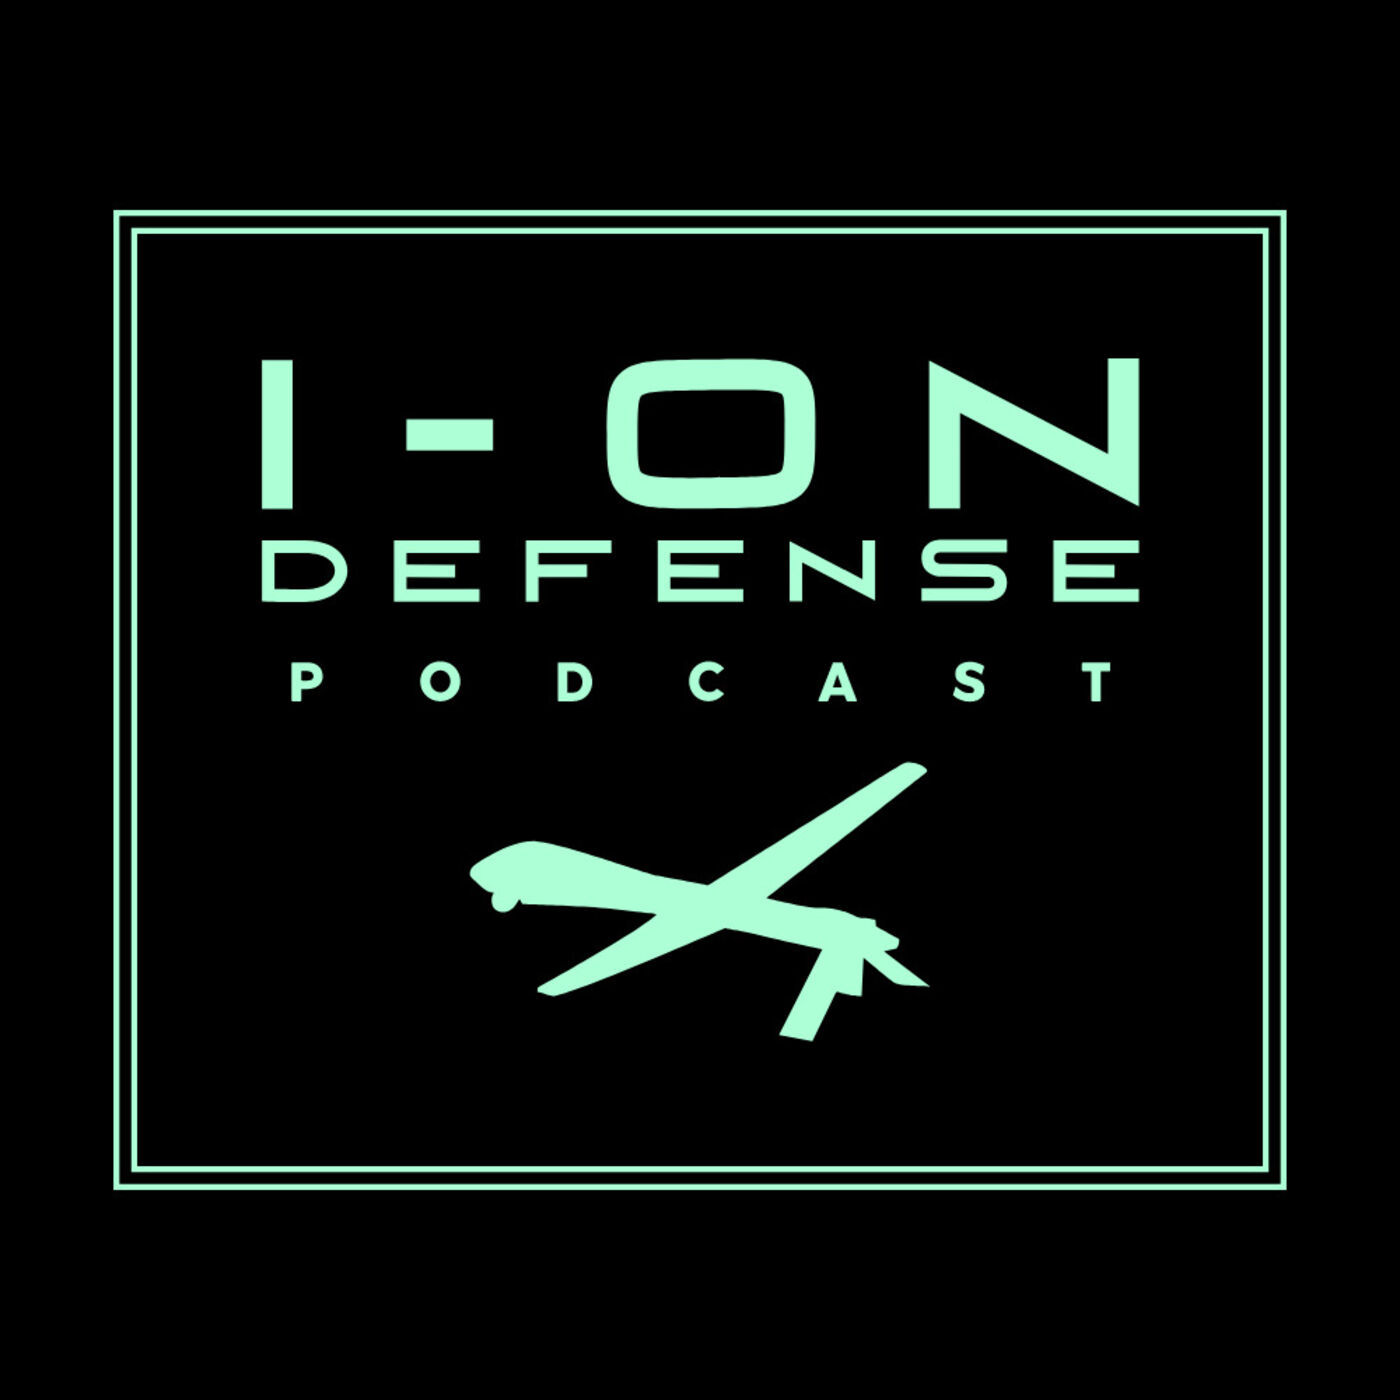 EP 73: FMS to Finland & Qatar + Army Dismounted cUAS System + B21 Raider Shown in Calif. + BAE's Optionally Manned Fighting Vehicle